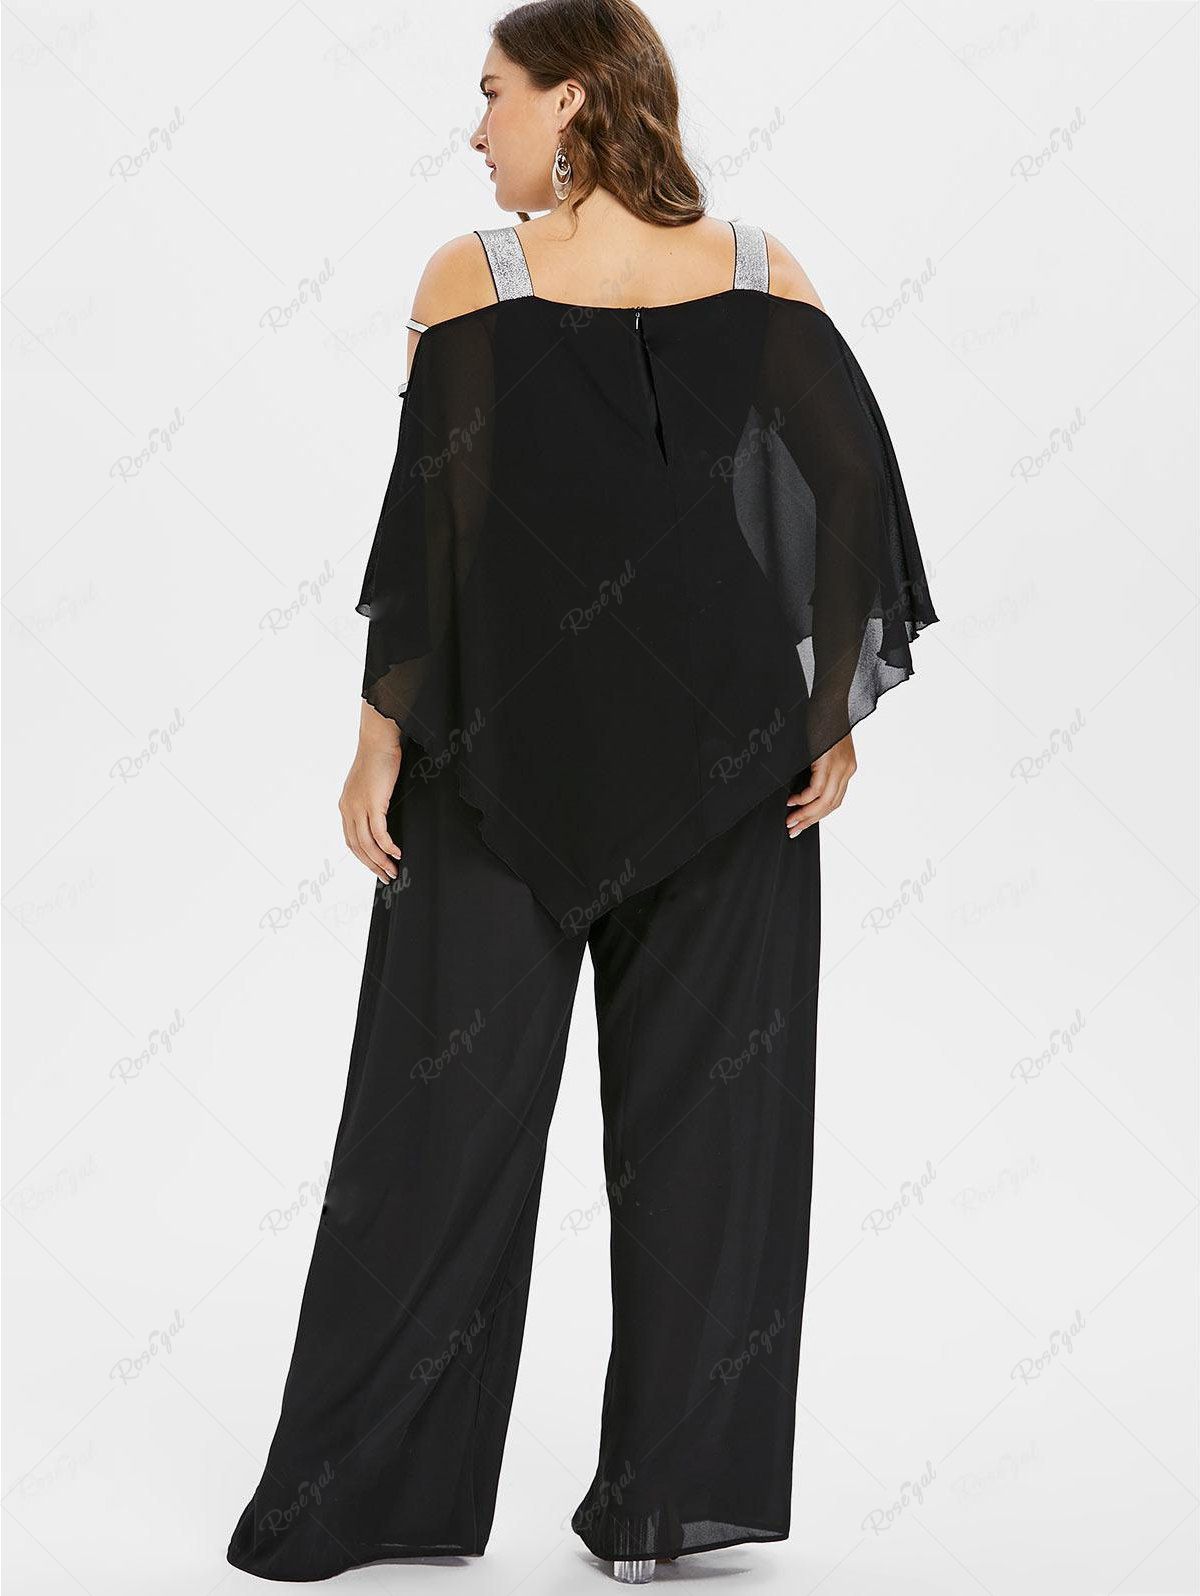 One Piece Plus Size Overlay Ladder Cut Out Wide Leg Jumpsuit Shorts Rosegal